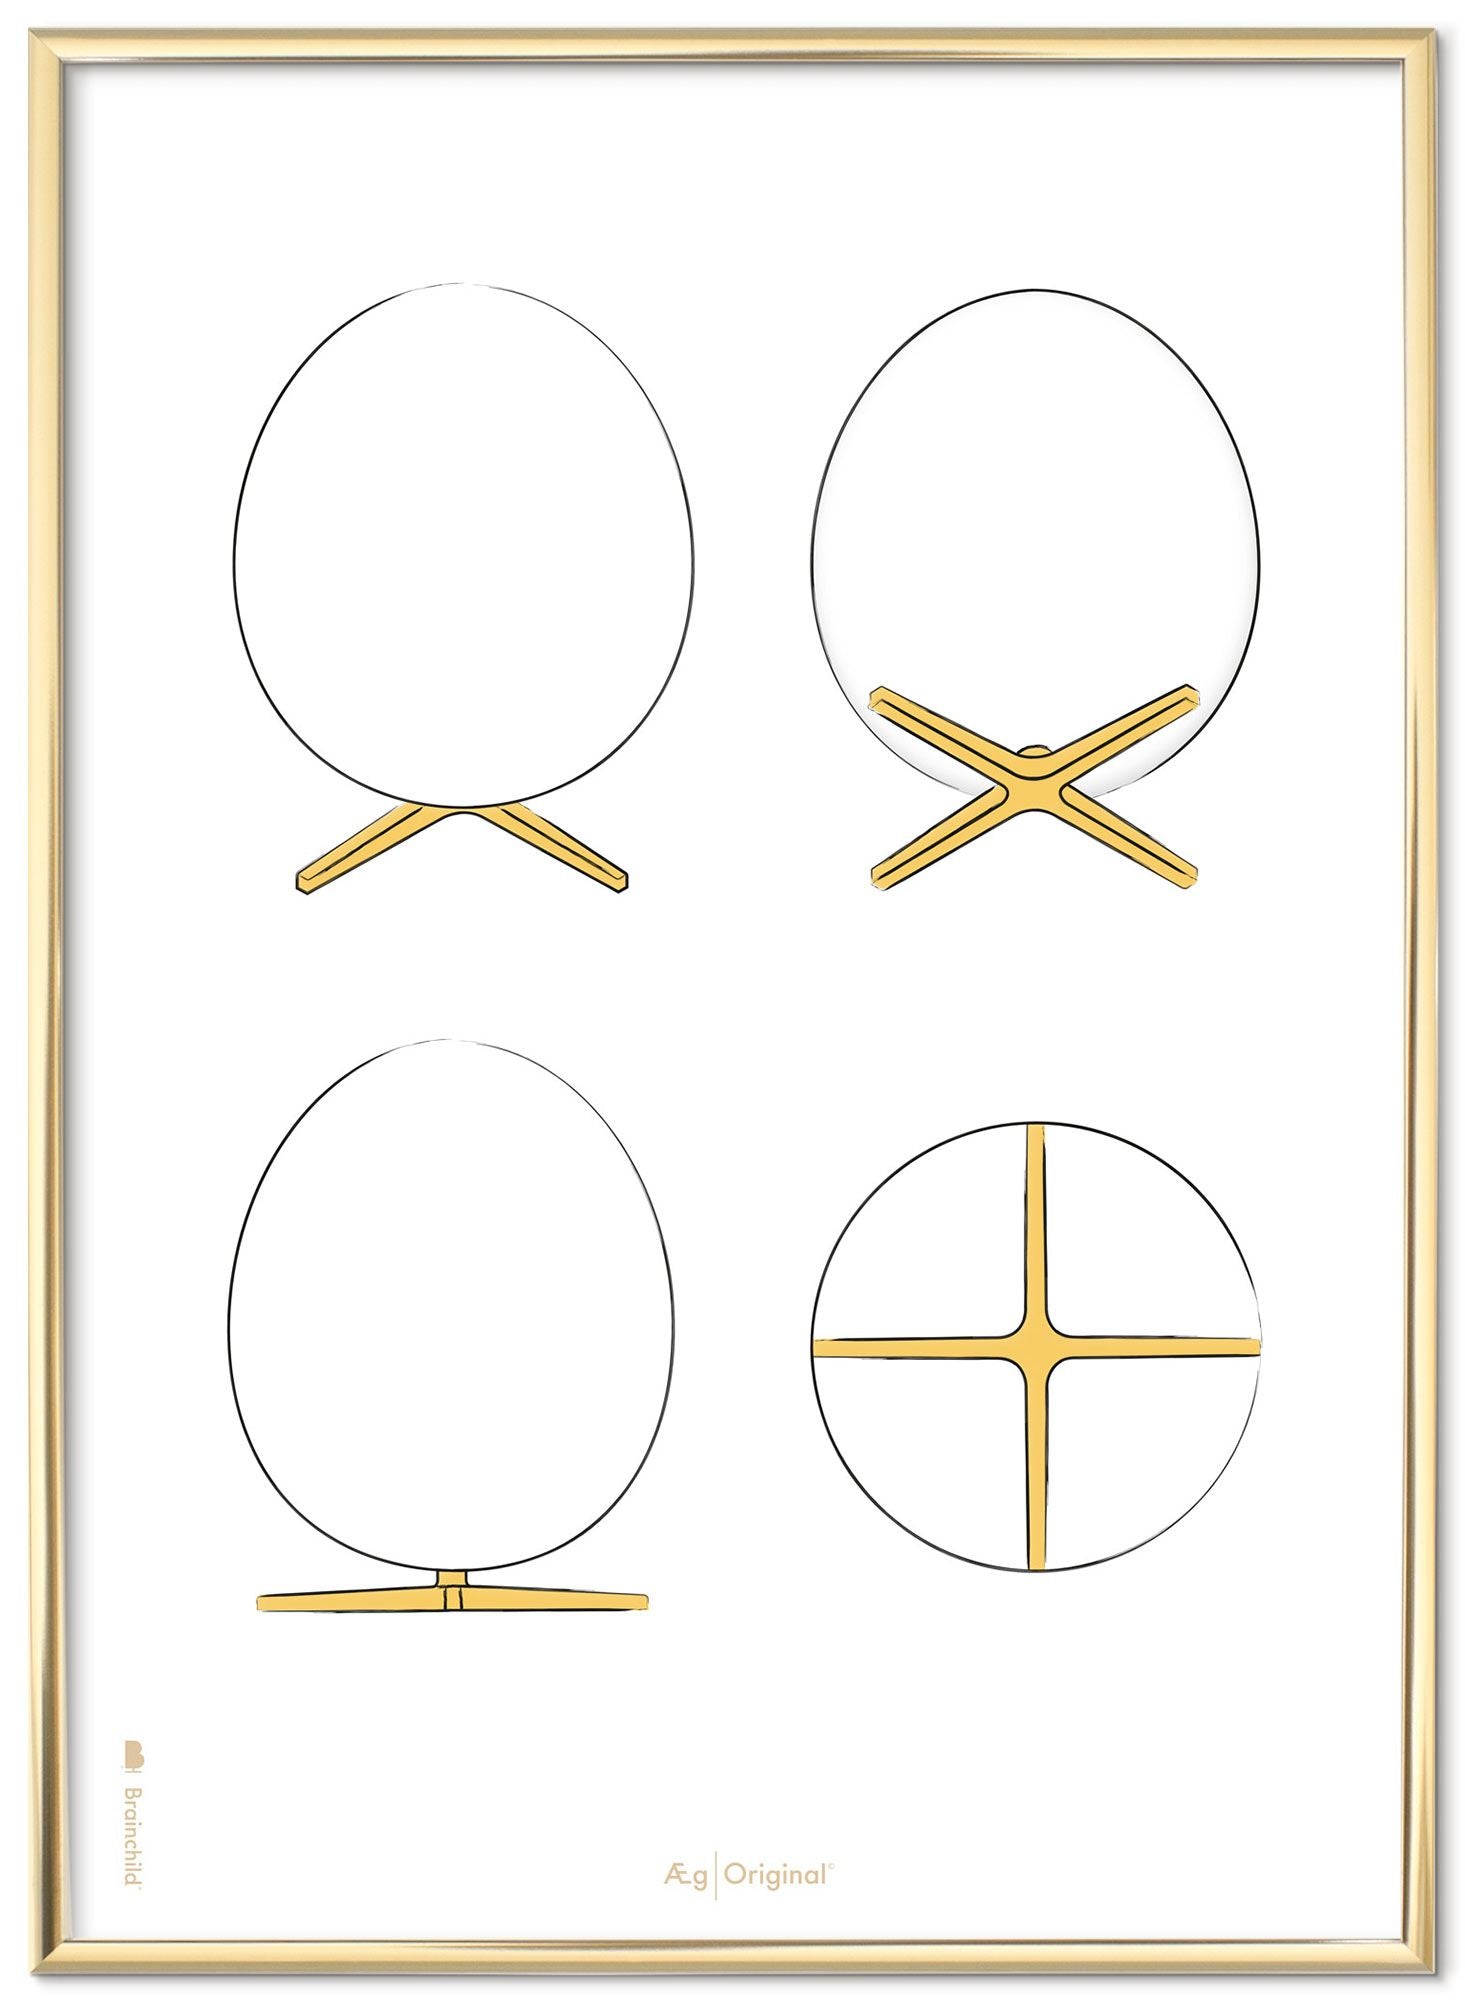 Brainchild The Egg Design Sketches Poster Frame Made Of Brass Colored Metal 30x40 Cm, White Background